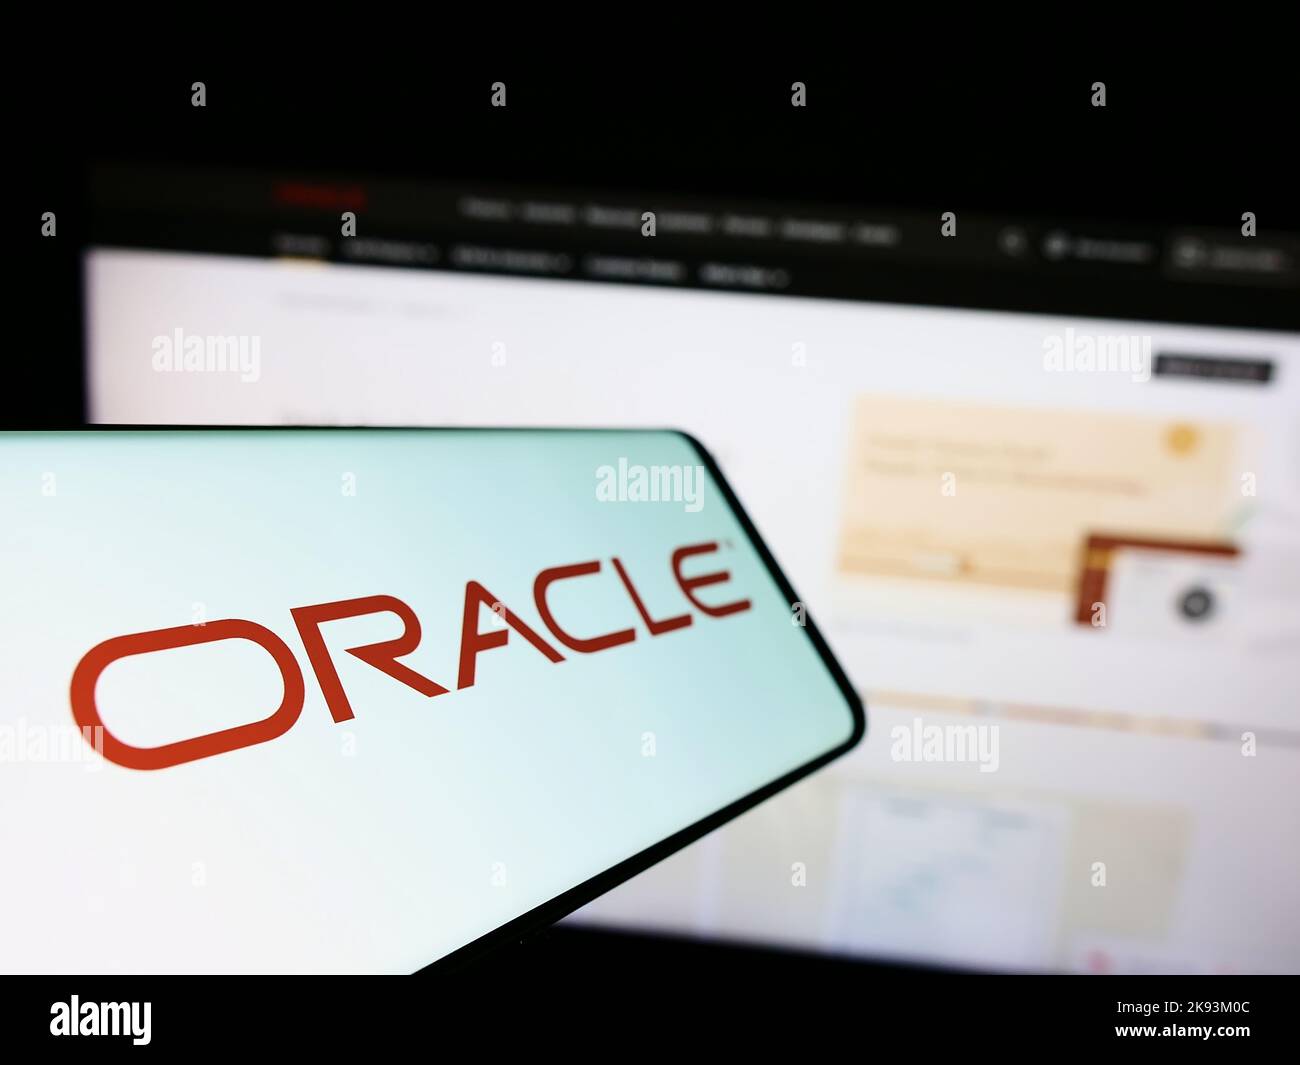 Mobile phone with logo of American technology company Oracle Corporation on screen in front of business website. Focus on left of phone display. Stock Photo